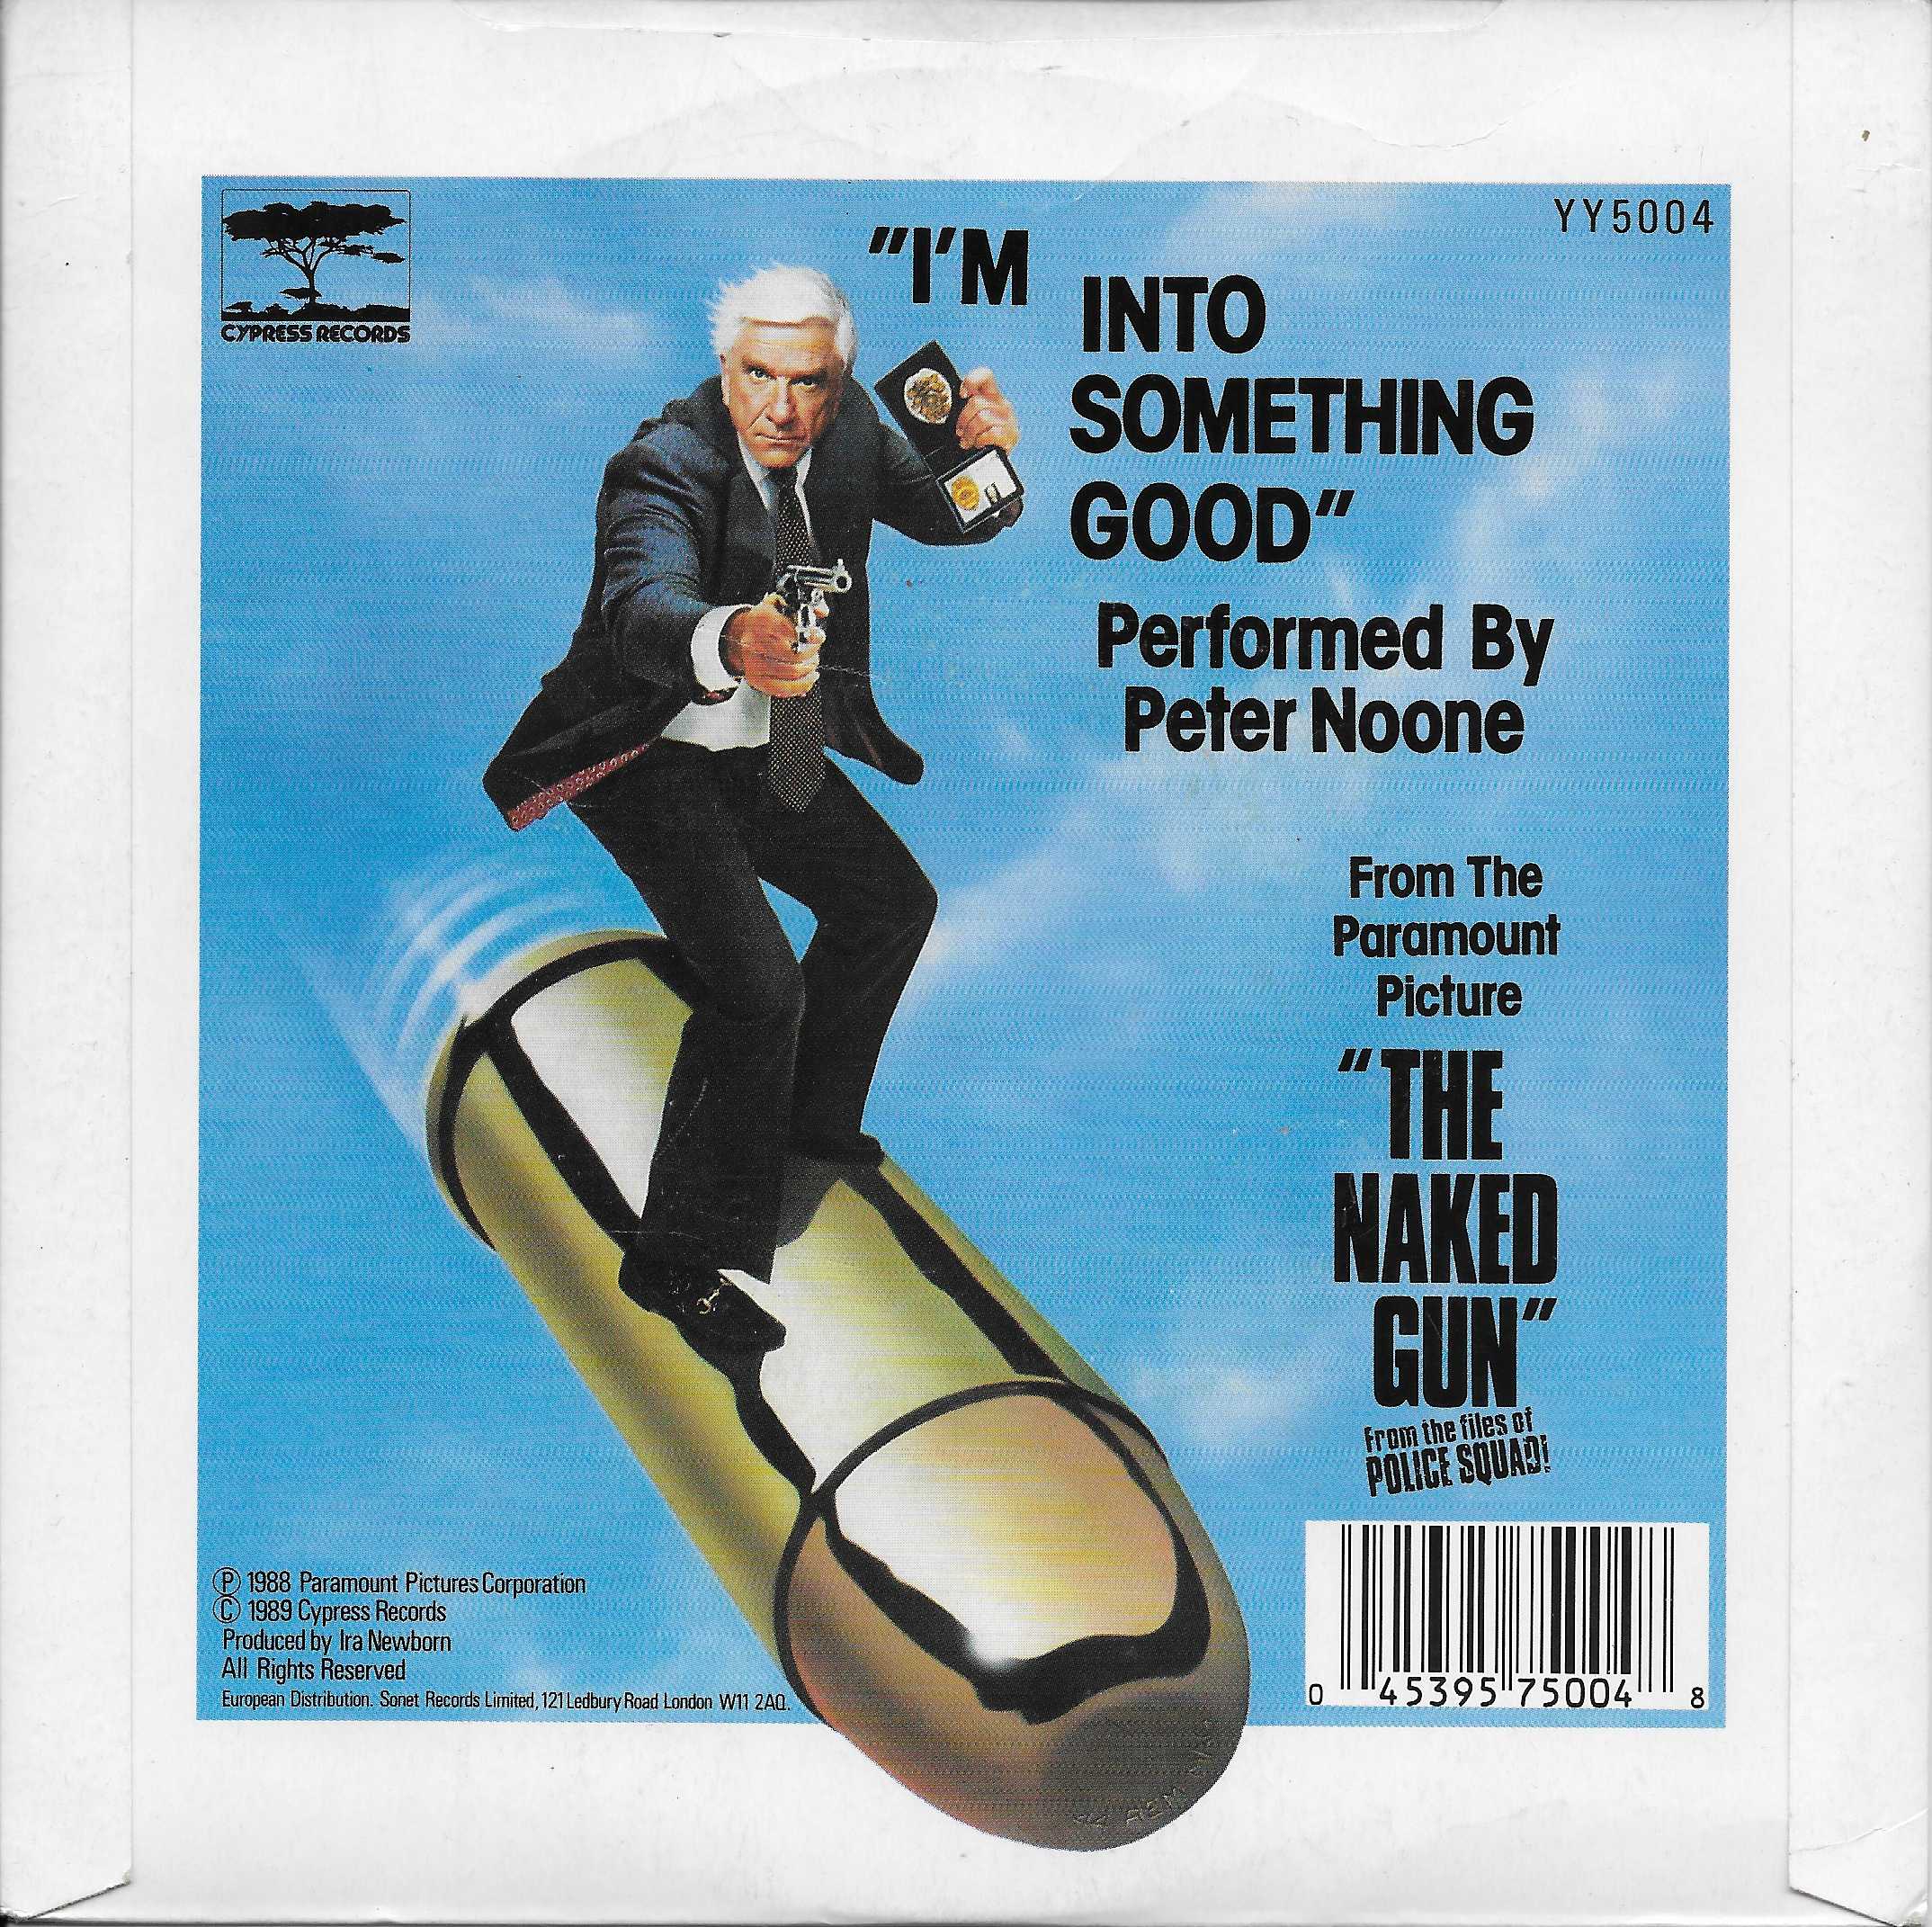 Picture of YY 5004 I'm into something good (The naked gun) by artist Gerry Goffin / Carole King / Peter Noone / Frannie Golde / Ailee Willis from ITV, Channel 4 and Channel 5 library